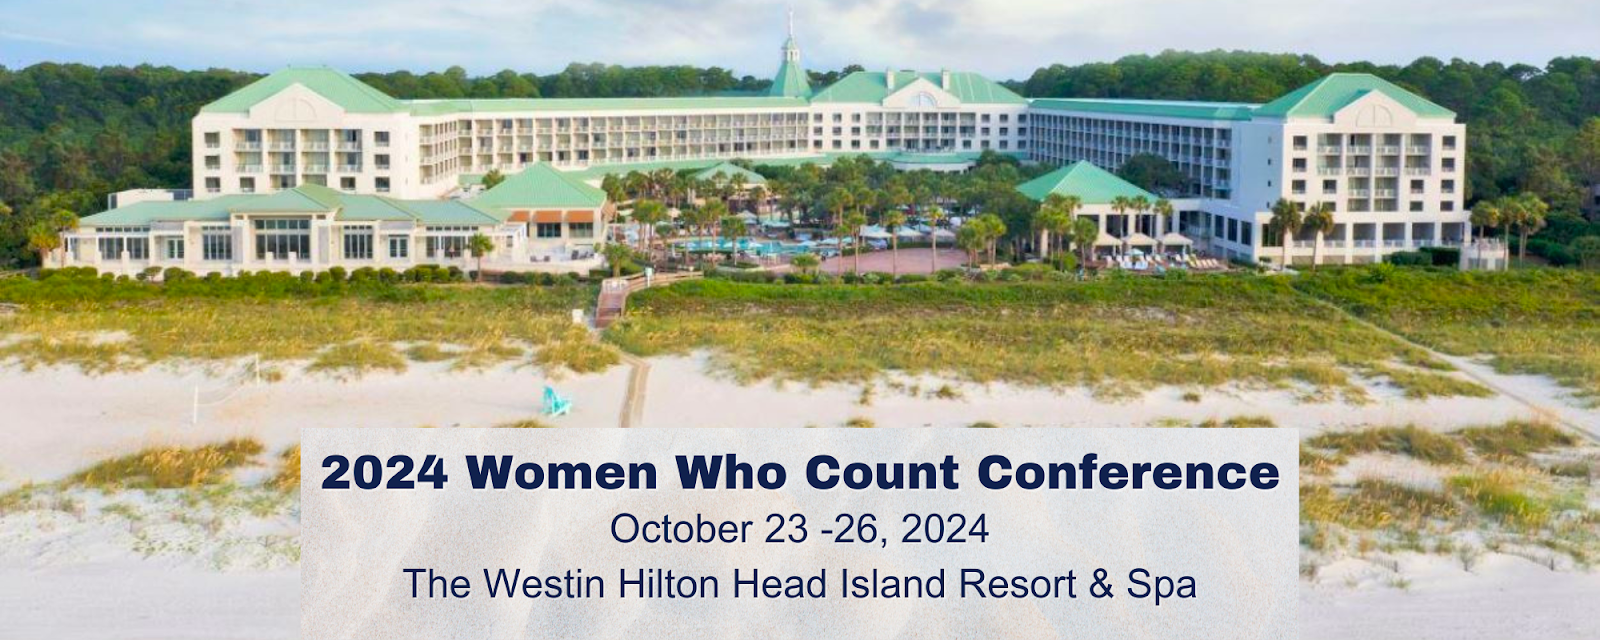 accounting conferences 2024 - Women Who Count Conference event banner